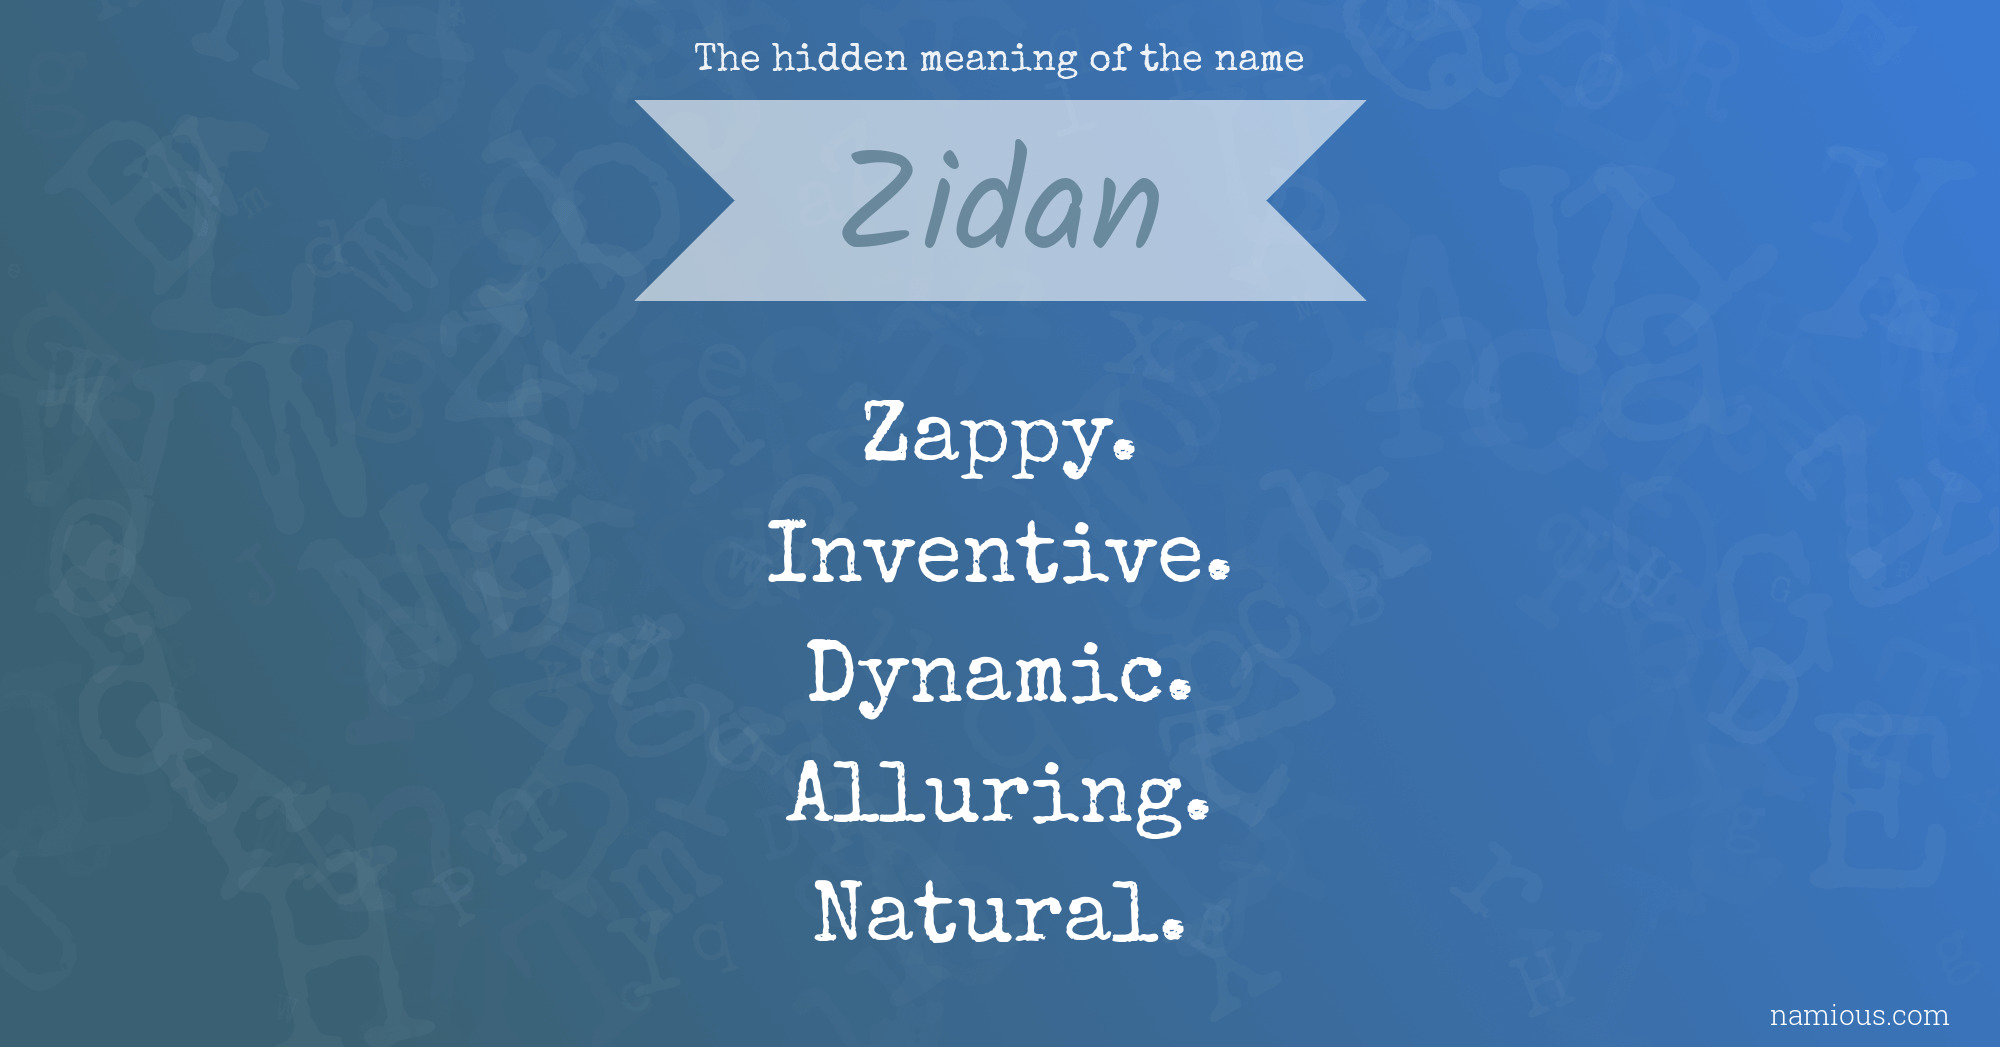 The hidden meaning of the name Zidan